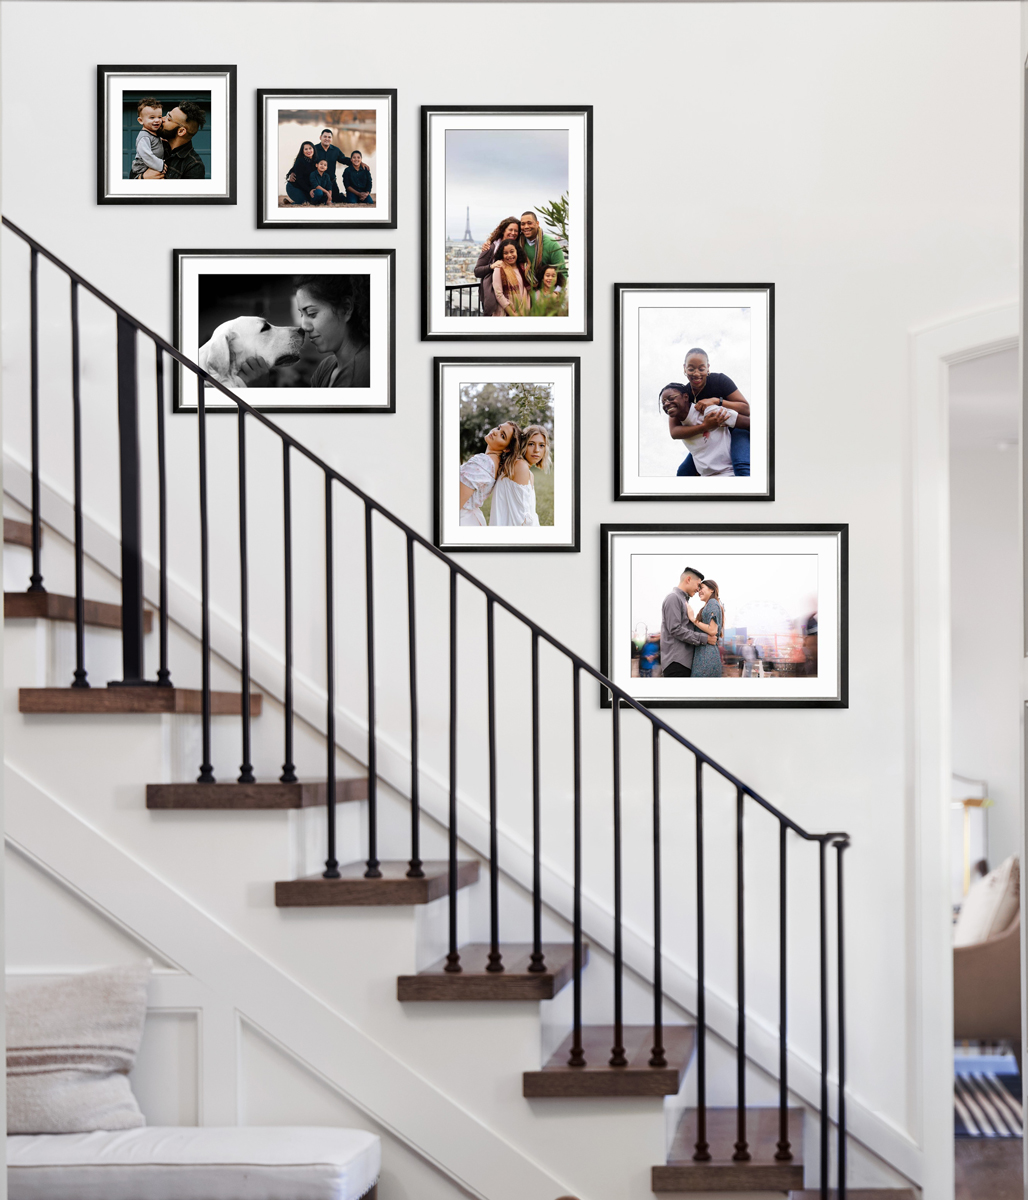 Family photo gallery wall hung above a staircase